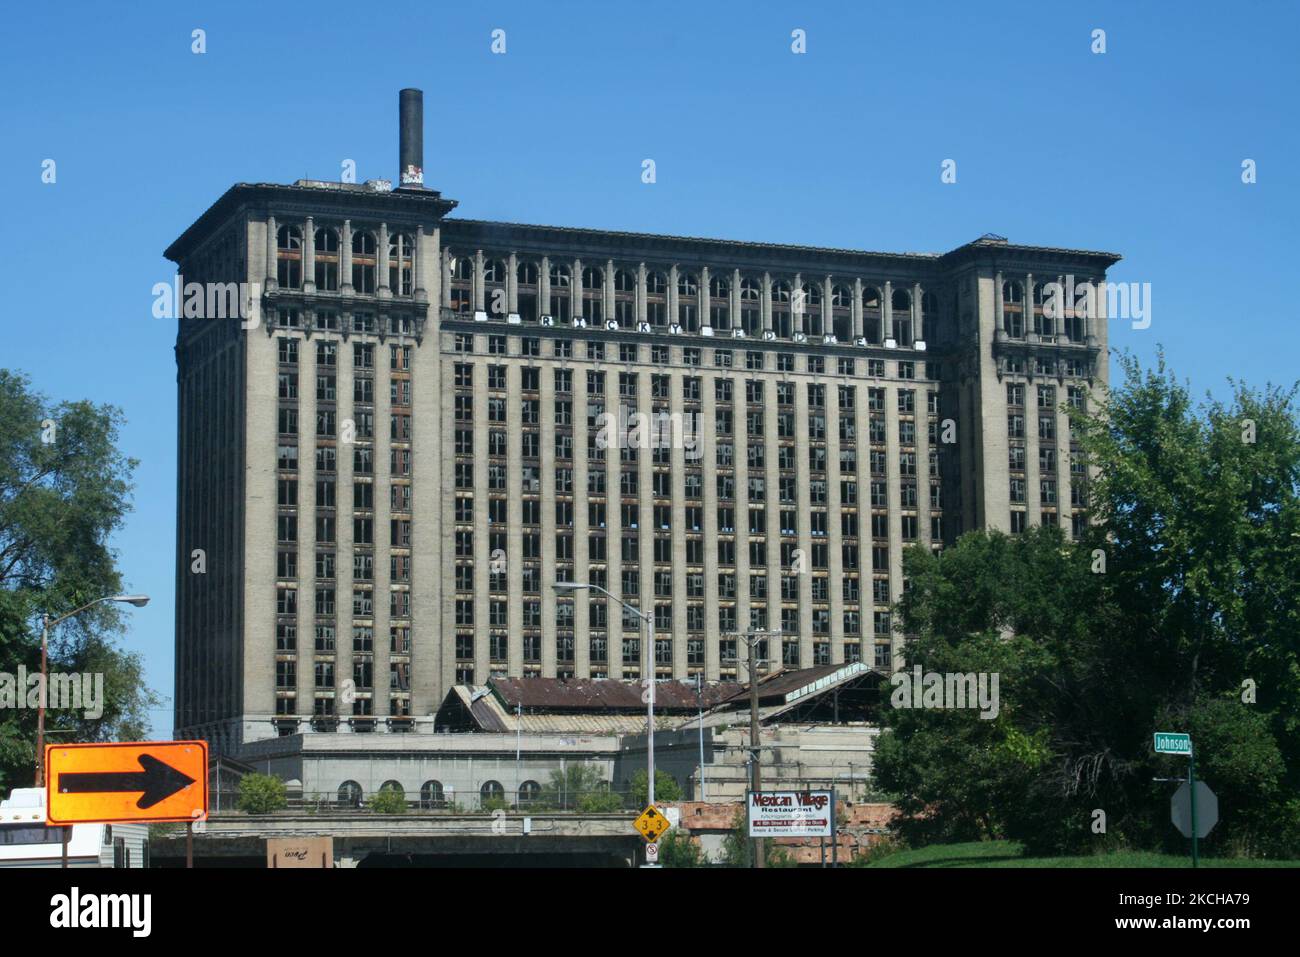 The shell of the abandoned Michigan Central Station building in downtown, Detroit, Michigan, USA, on September 01, 2007. Due to mass unemployment and poverty caused by the disappearance of the automotive manufacturing sector much of the city of Detroit has become a run-down urban wasteland. (Photo by Creative Touch Imaging Ltd./NurPhoto) Stock Photo